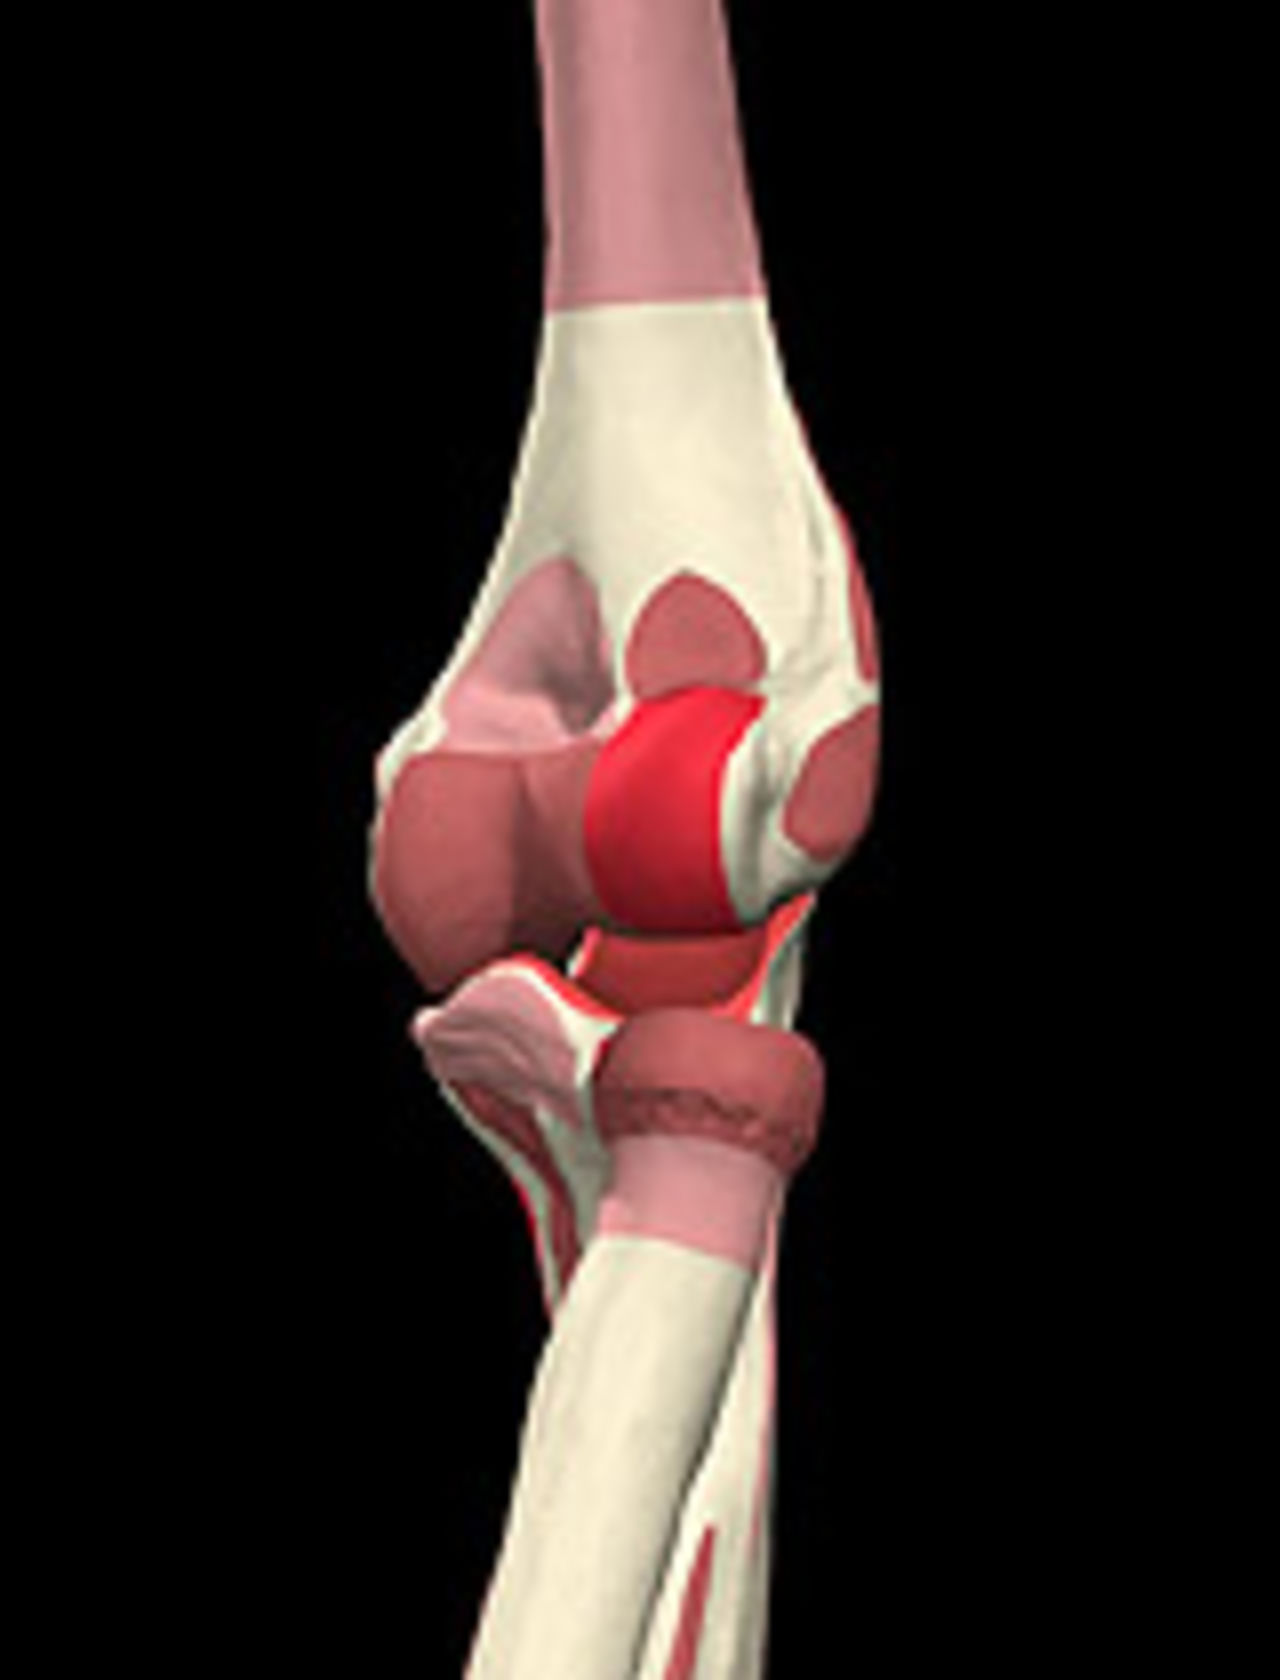 The bones of the lateral elbow showing the epicondyle